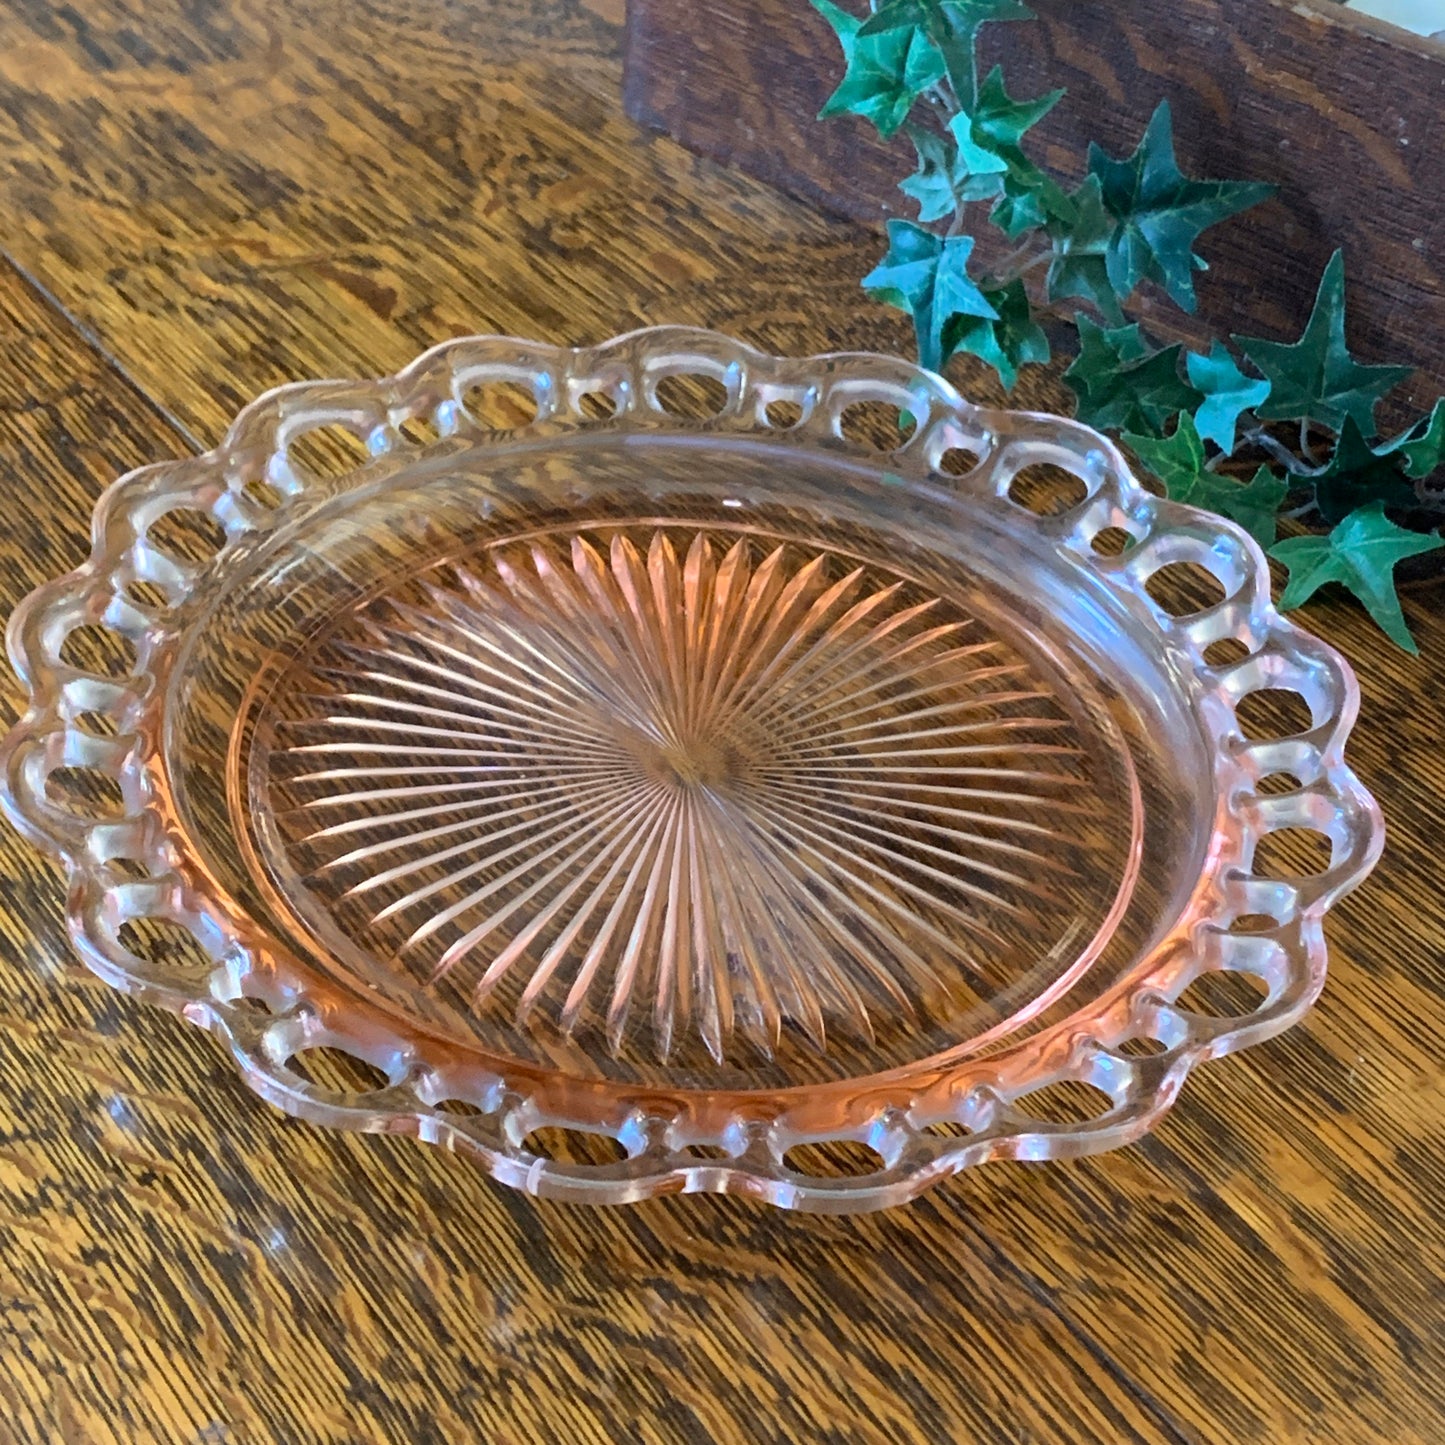 Pink Depression Glass Dinner Plate Old Colony Laced Edge Hocking Glass Company